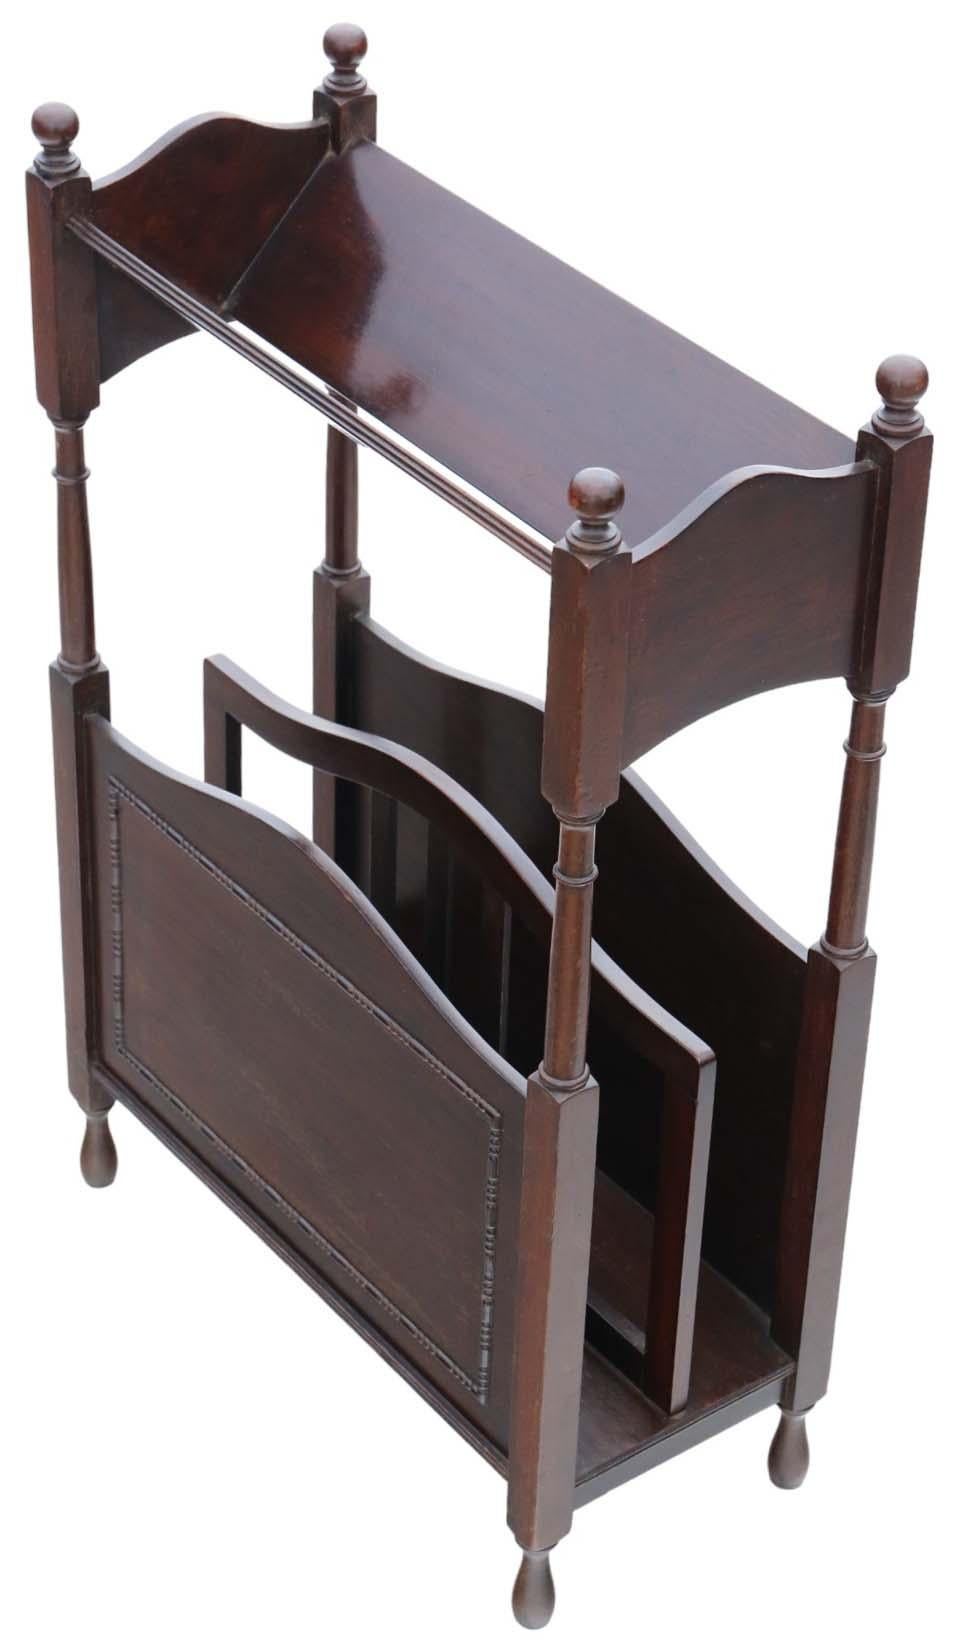 Antique Art Nouveau Mahogany Book Trough Stand, serving as a bookcase and magazine rack from around 1920.

This piece is sturdy and durable, with no loose joints or woodworm, representing a charming and rare find of quality.

It is certain to draw